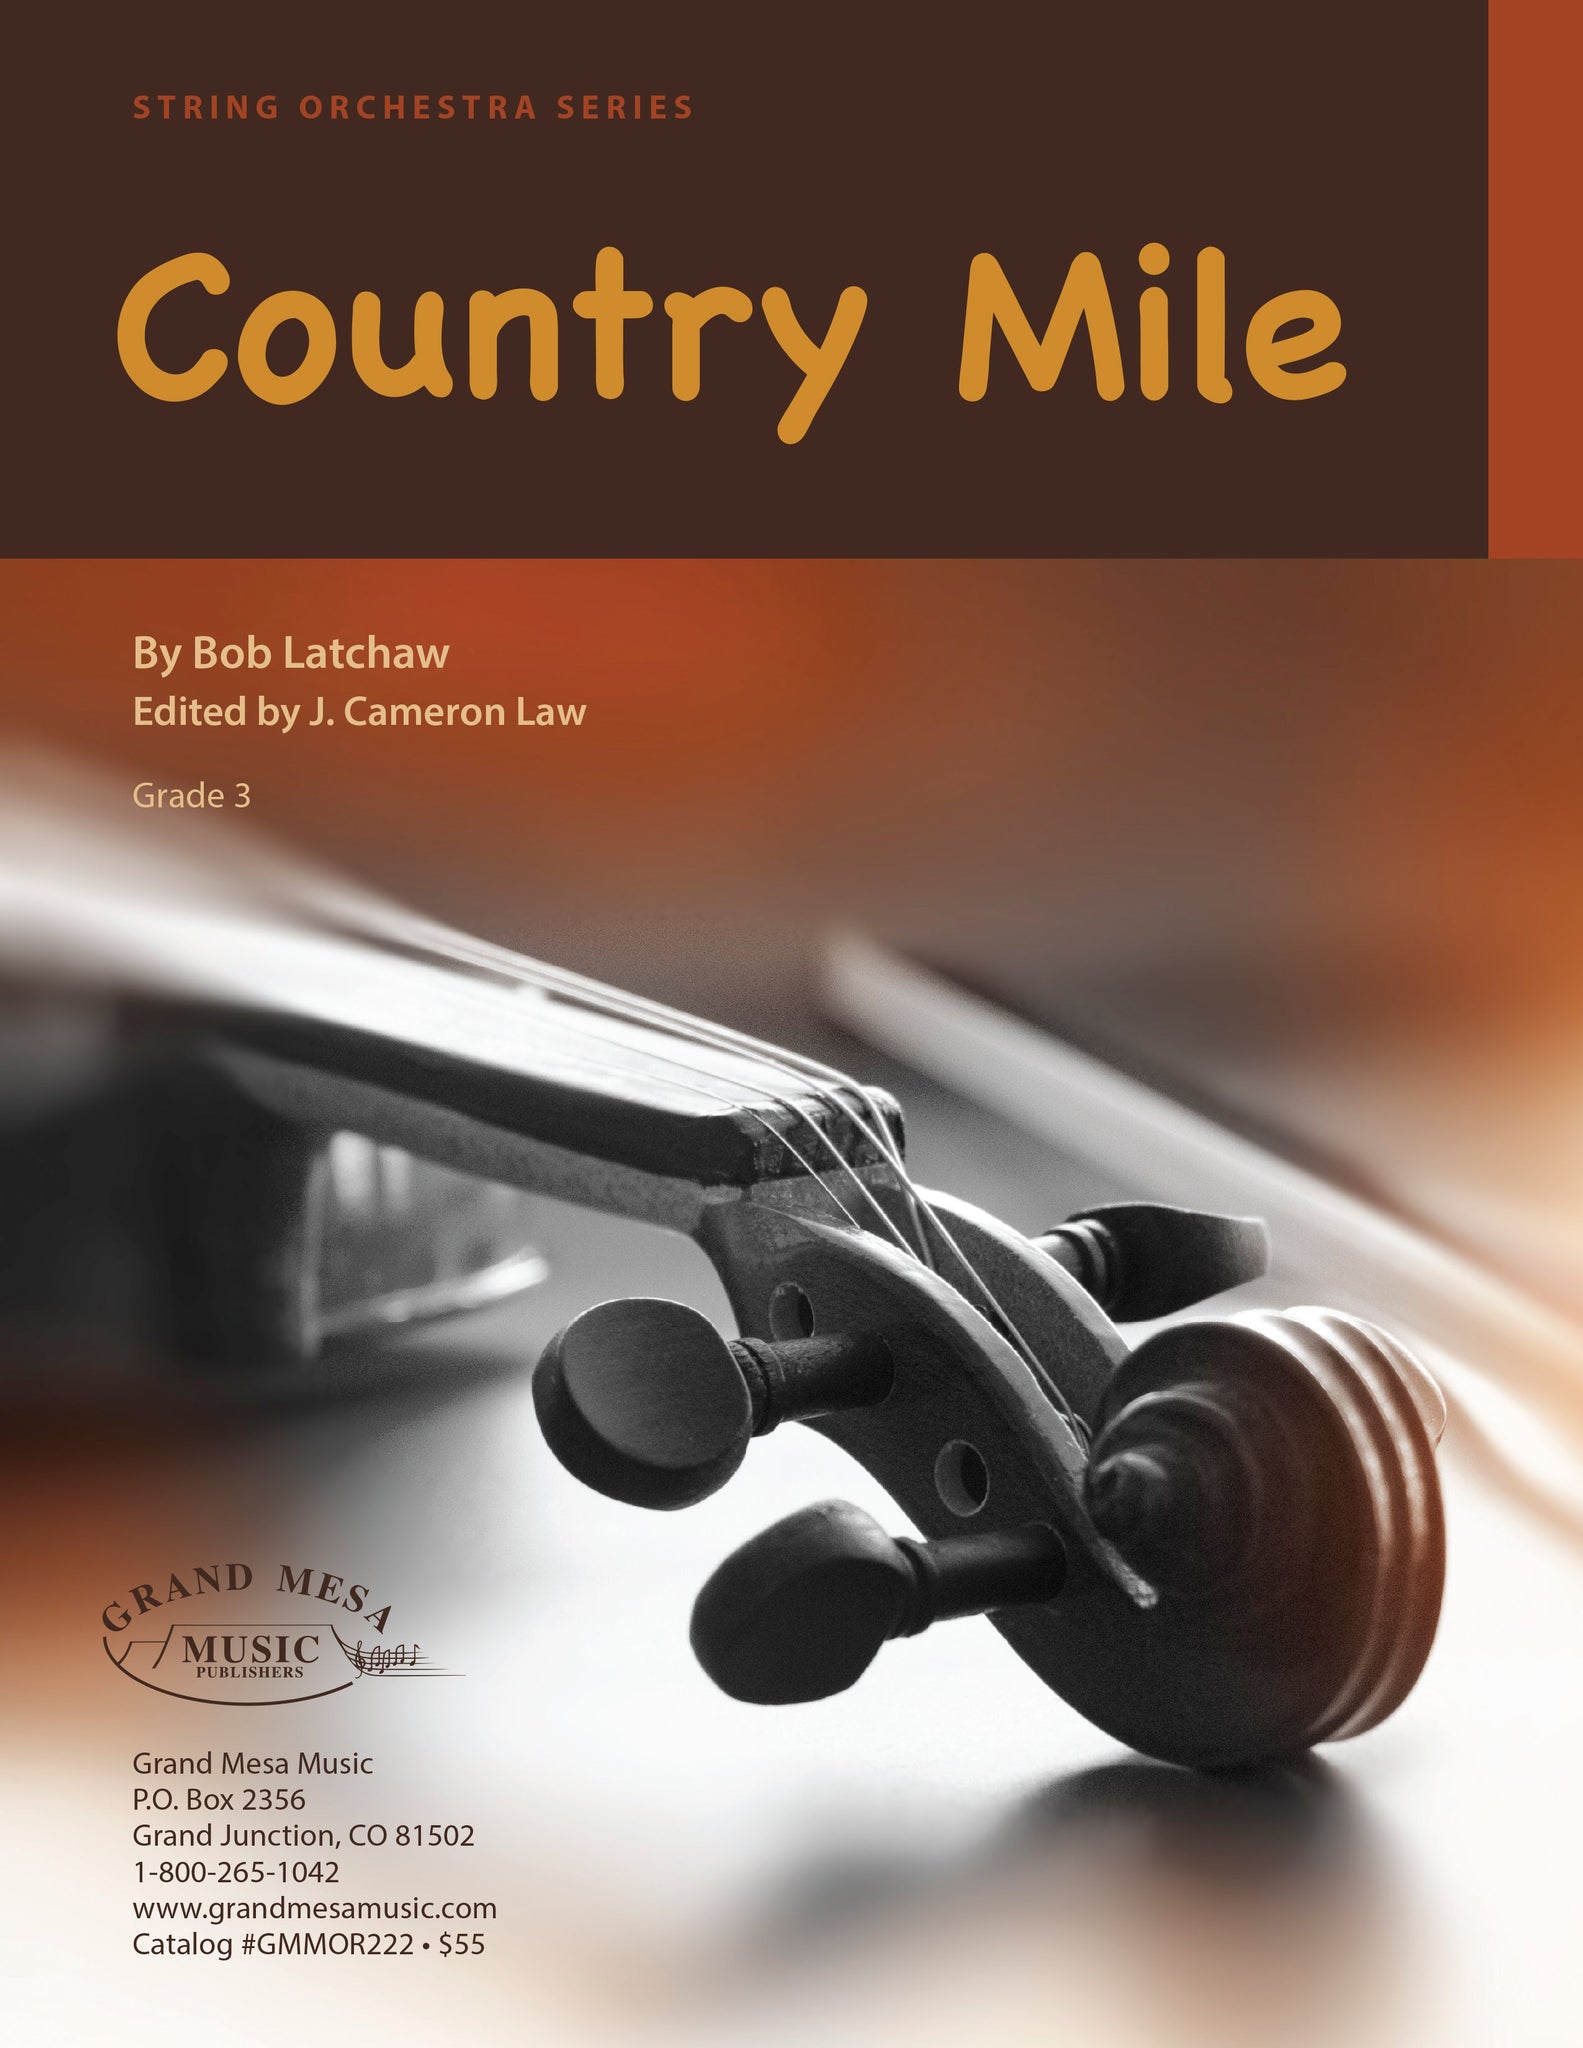 Strings sheet music cover of Country Mile, composed by Bob Latchaw.